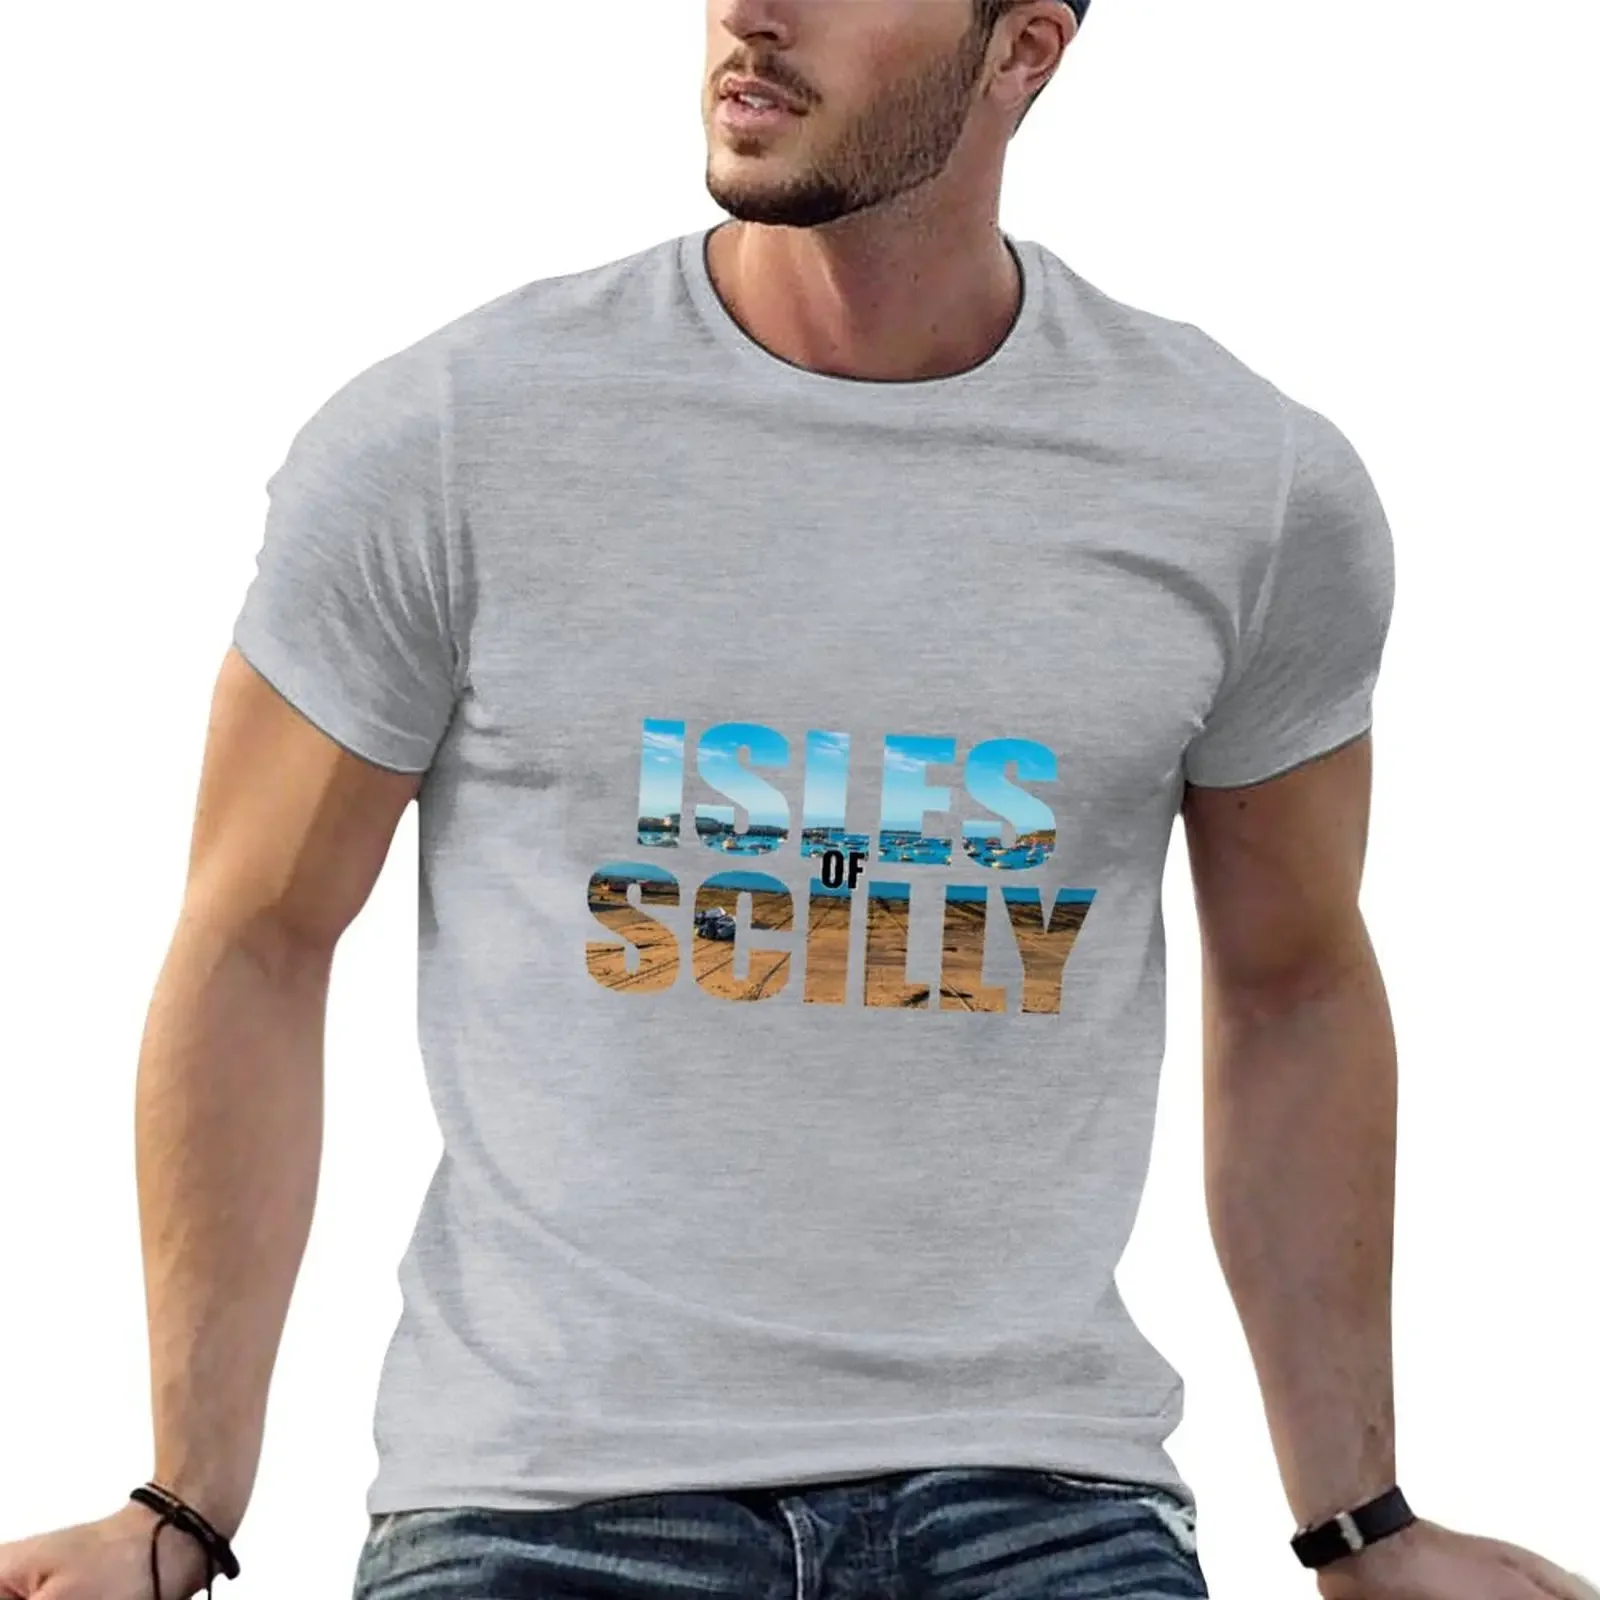 

Town Beach, St Marys, Isles of Scilly T-Shirt blanks for a boy black t shirts for men